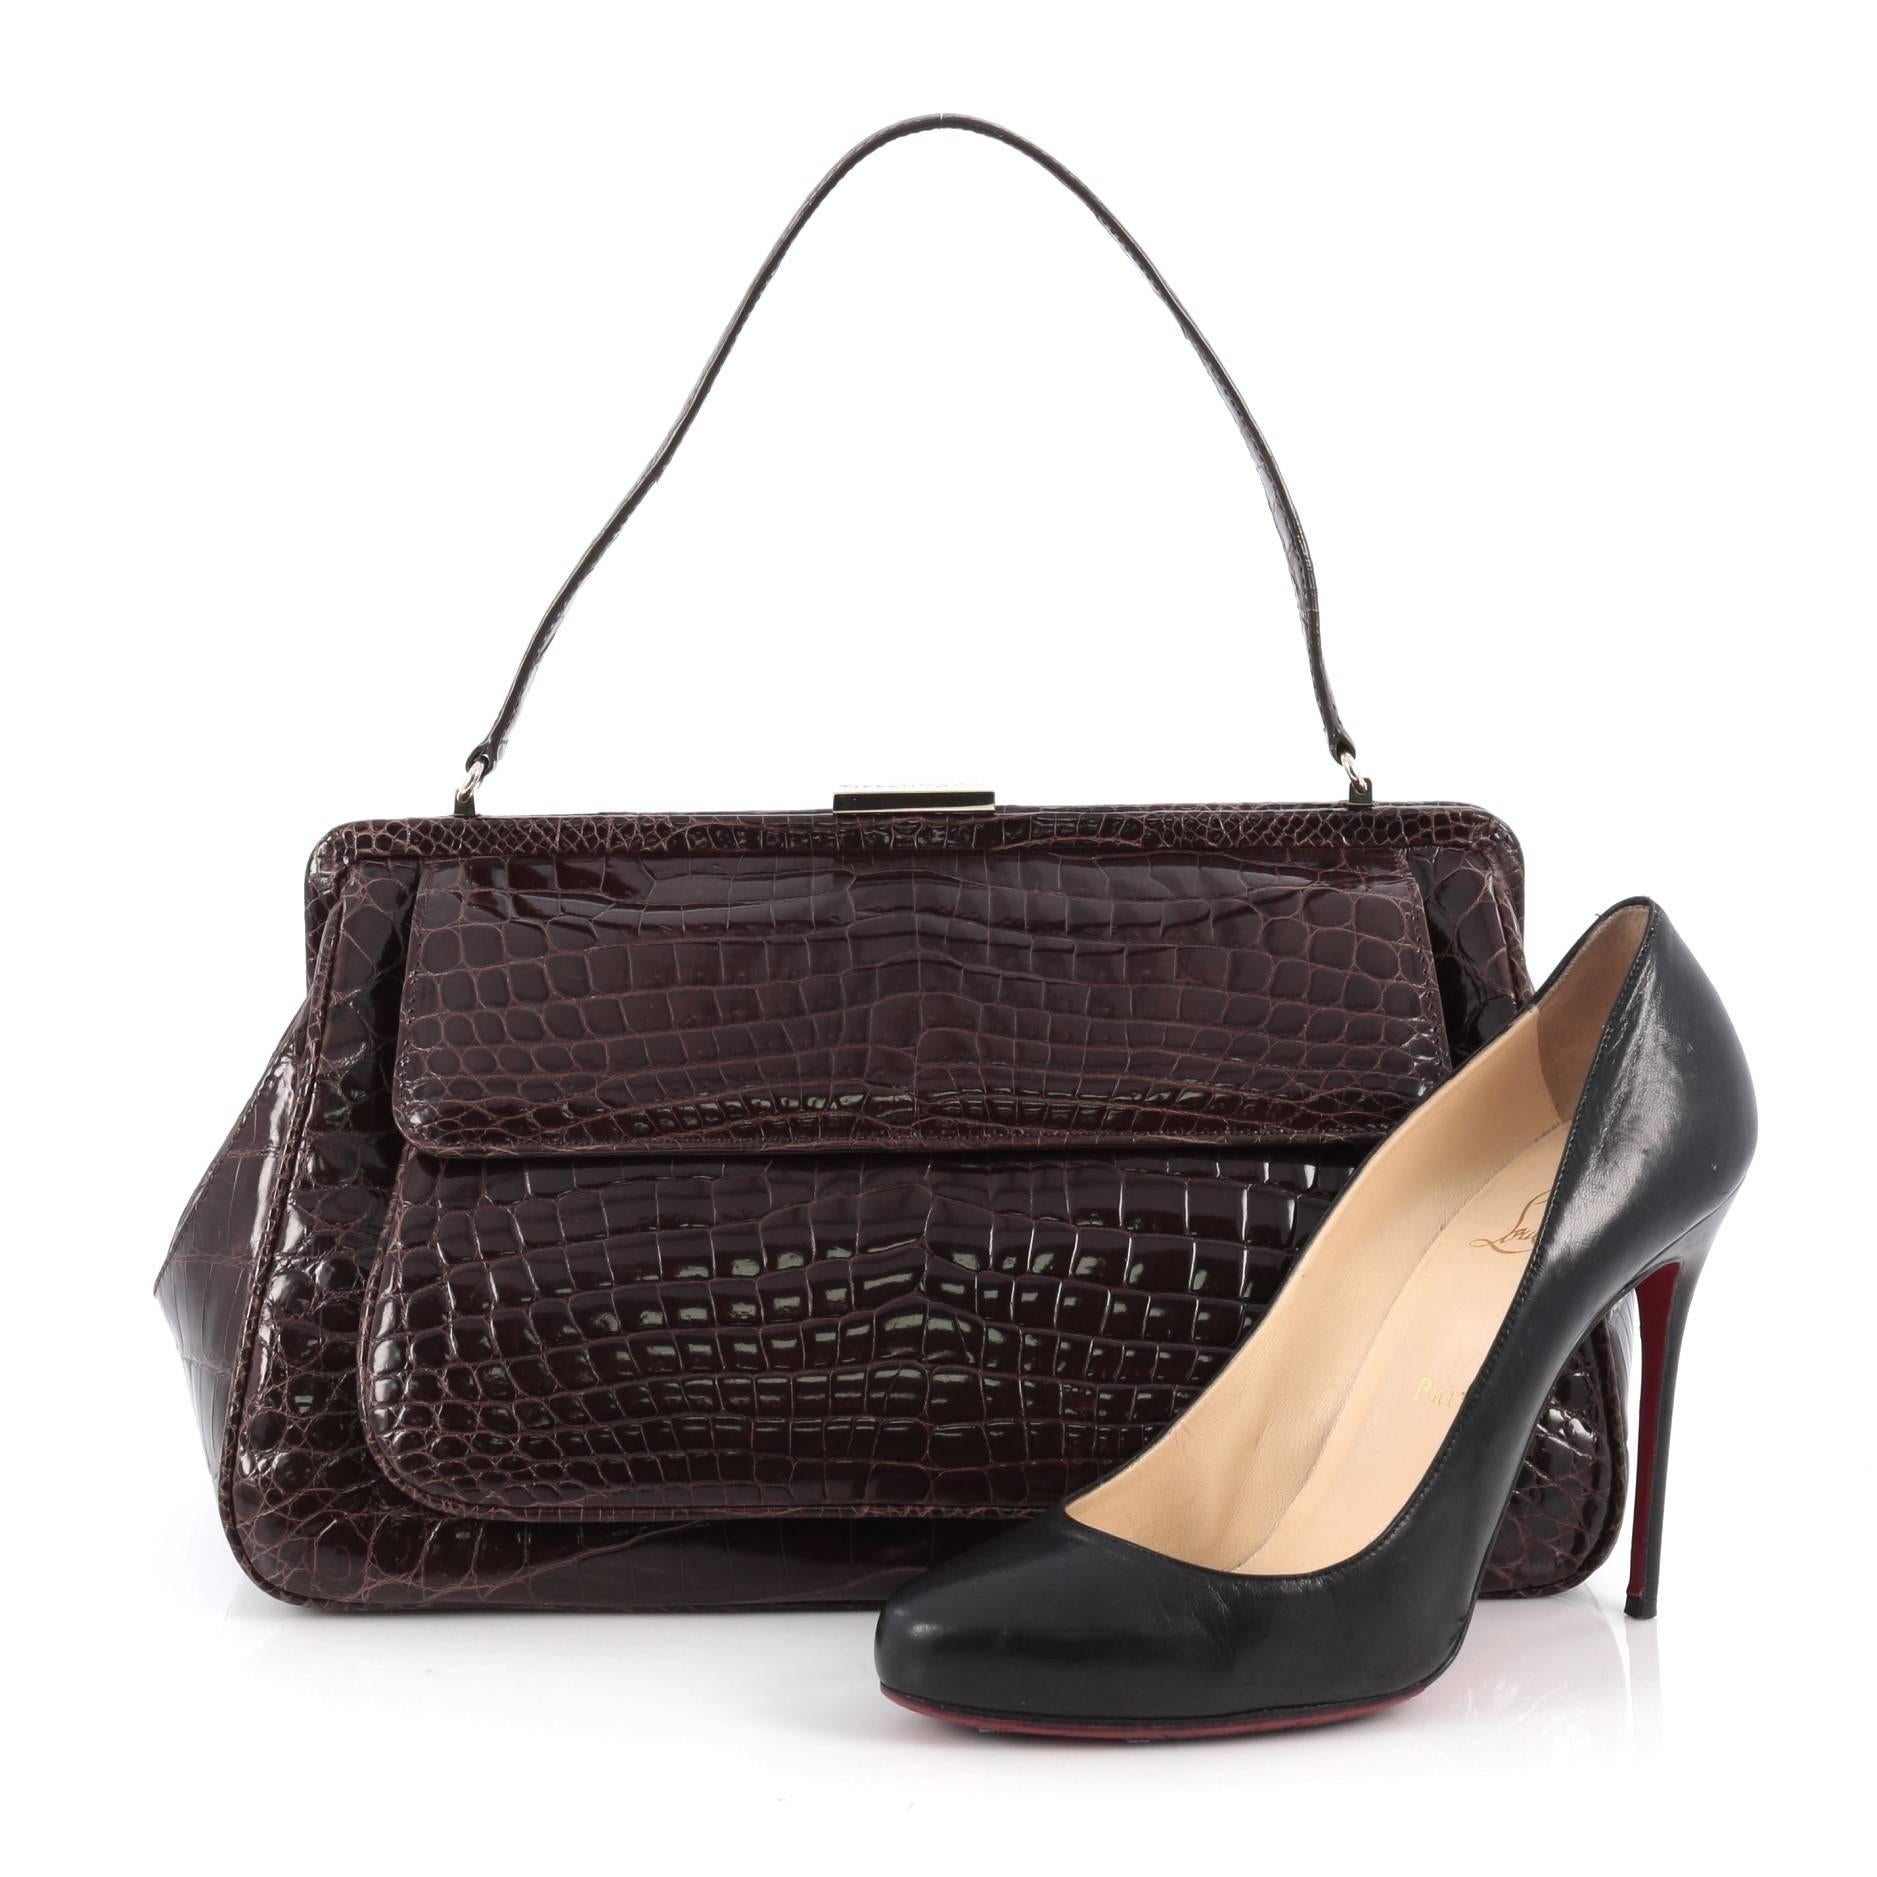 This authentic Tiffany & Co. Laurelton Handbag Crocodile is a chic and sophisticated bag perfect for everyday looks and night outs. Crafted from genuine brown crocodile skin, this luxurious, exotic bag features a single flat handle, exterior pocket